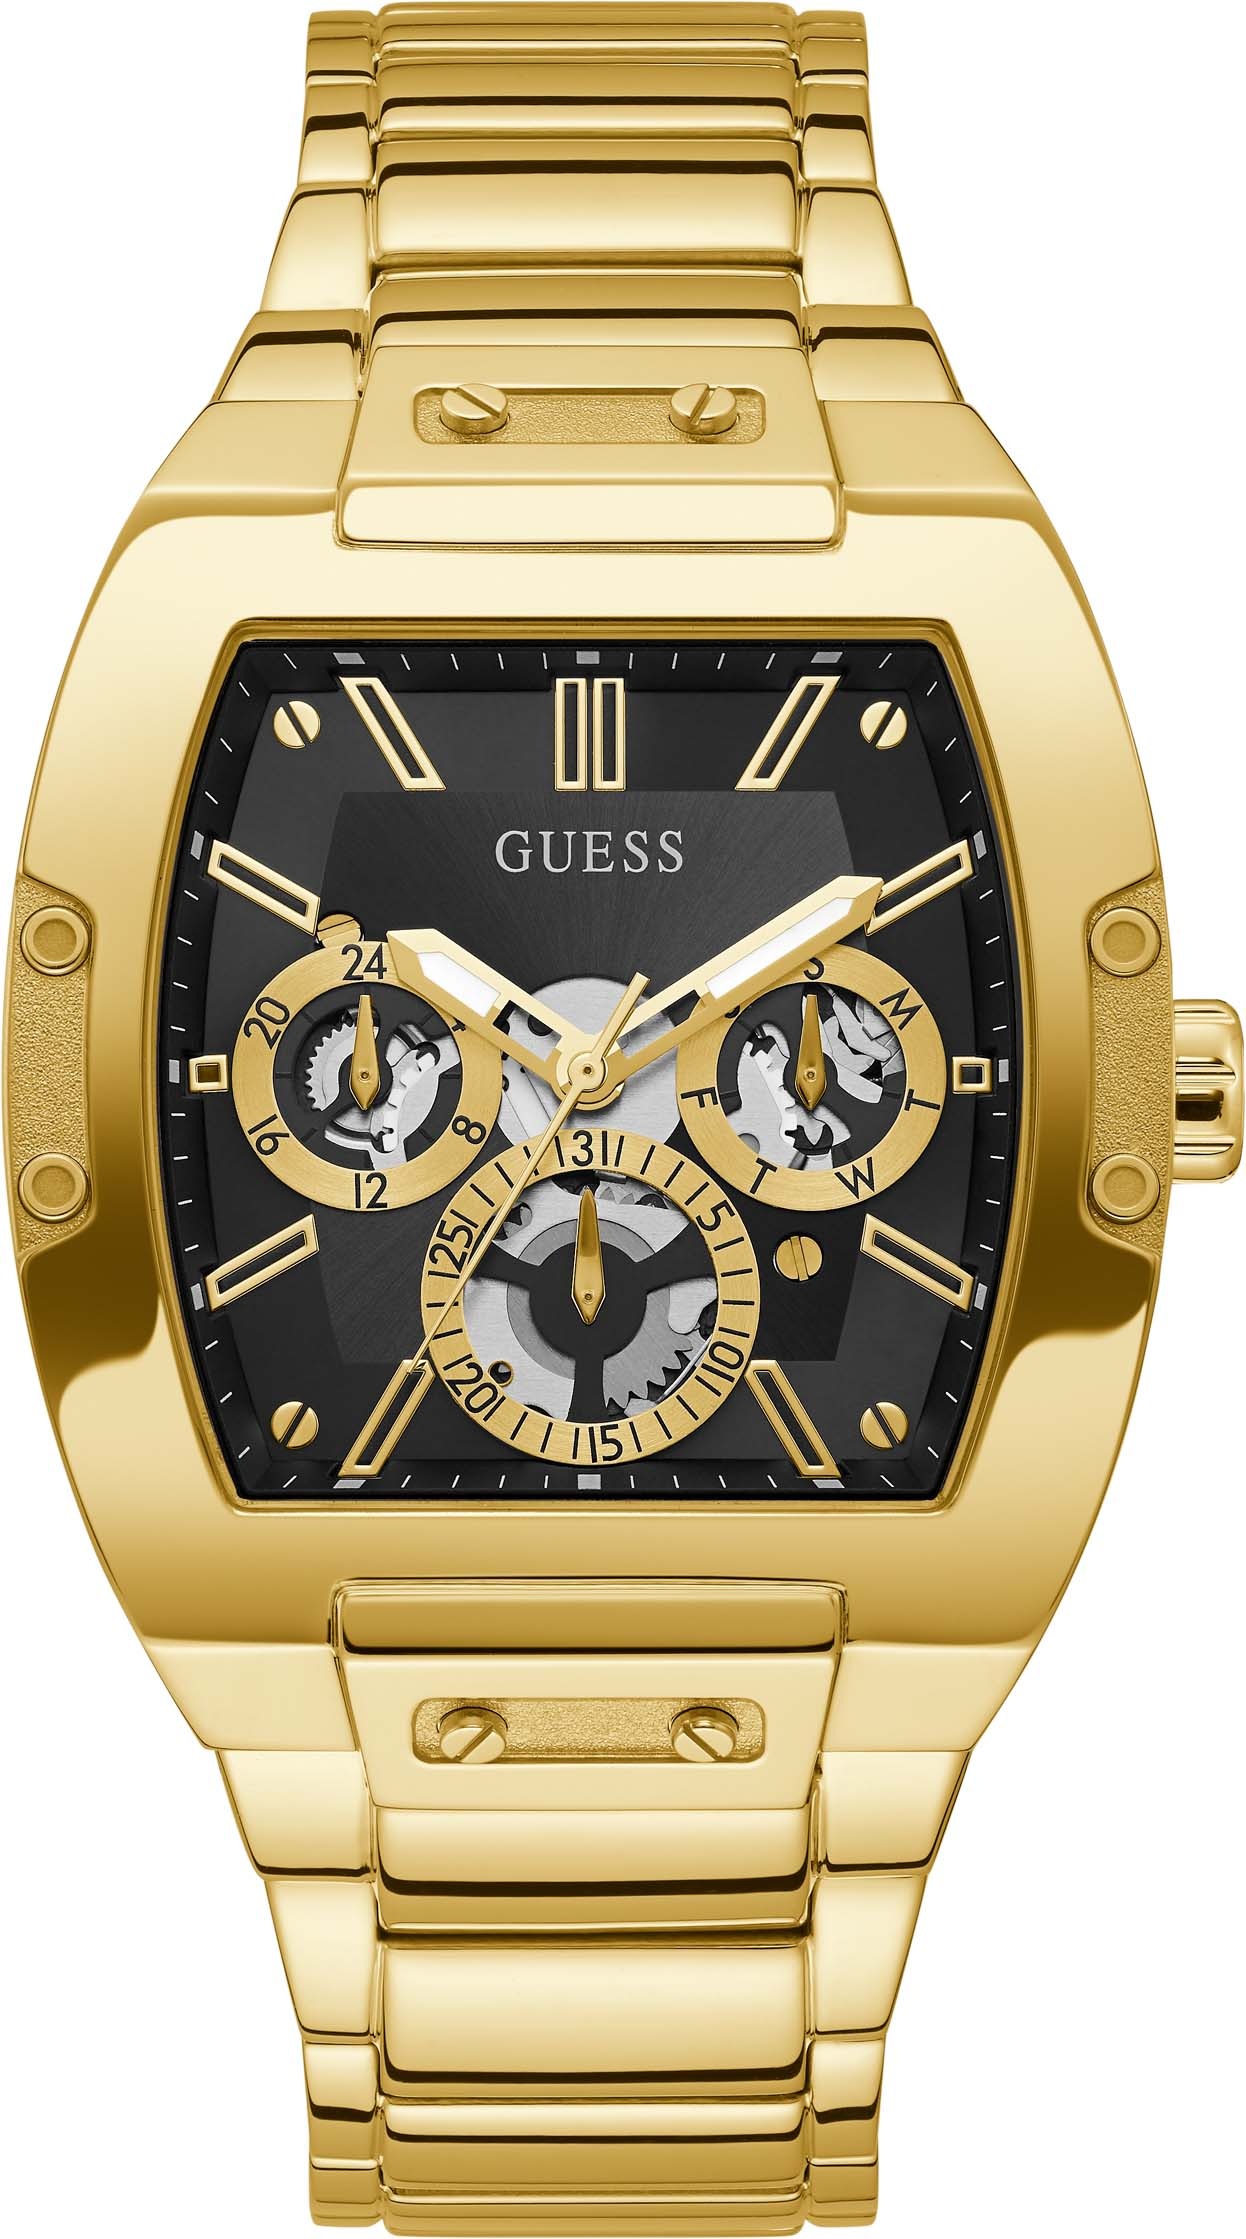 bei Multifunktionsuhr Guess ♕ »GW0456G1«